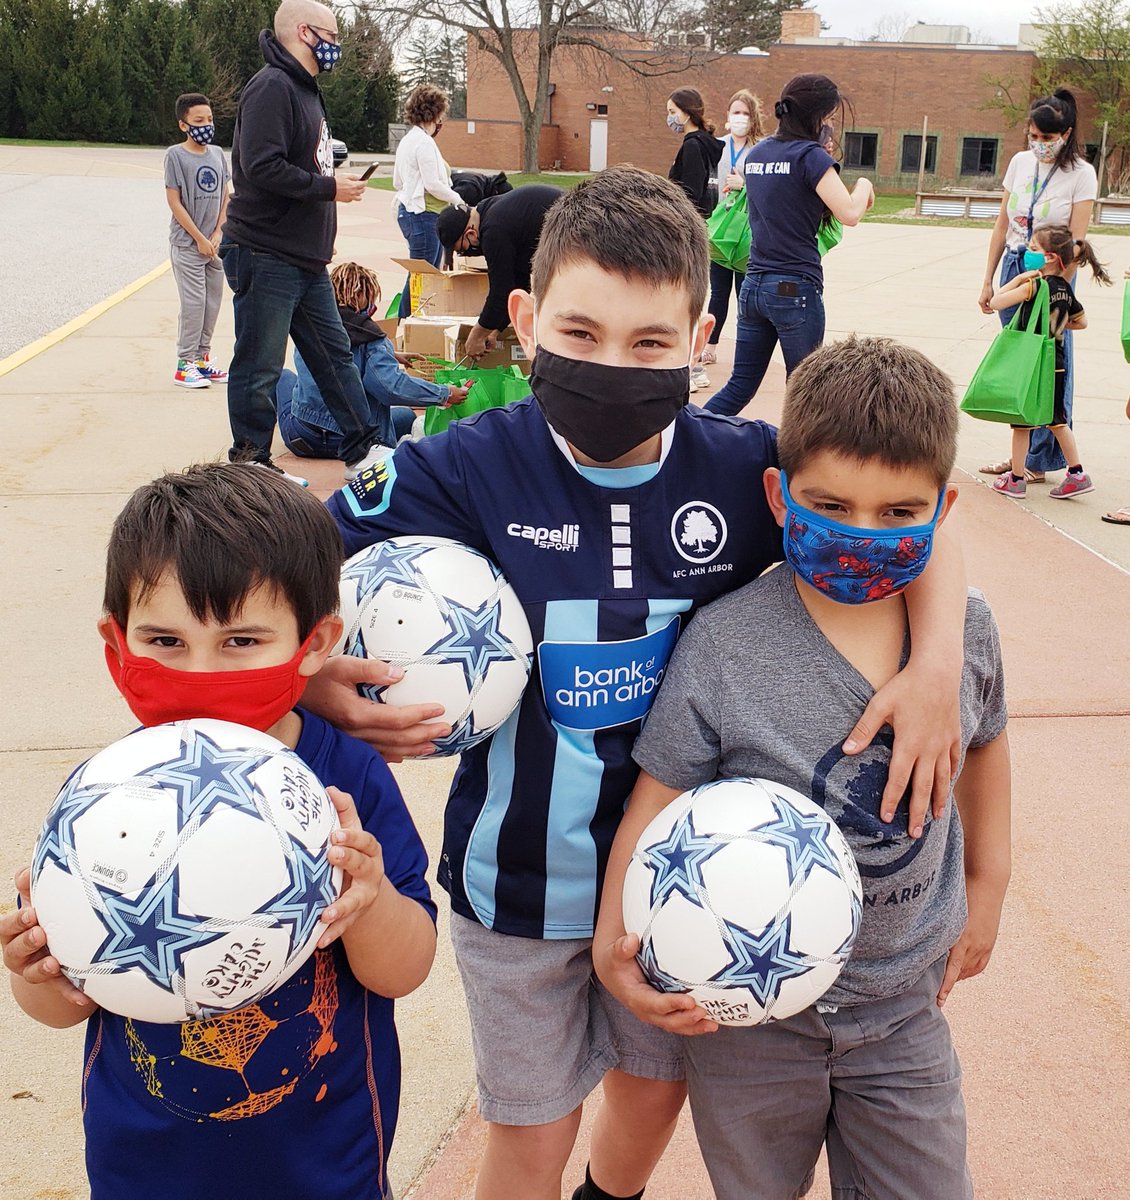 THANK YOU to @AFCAnnArbor for visiting the students of Bishop Elementary Spanish Immersion! Mis fútbolitos are SO excited to play with their new soccer balls and can't wait to cheer you on next season! #AFCAAFamily #BishopSpanishImmersion #COYMO #MisFútbolitos #LosTresBrochachos